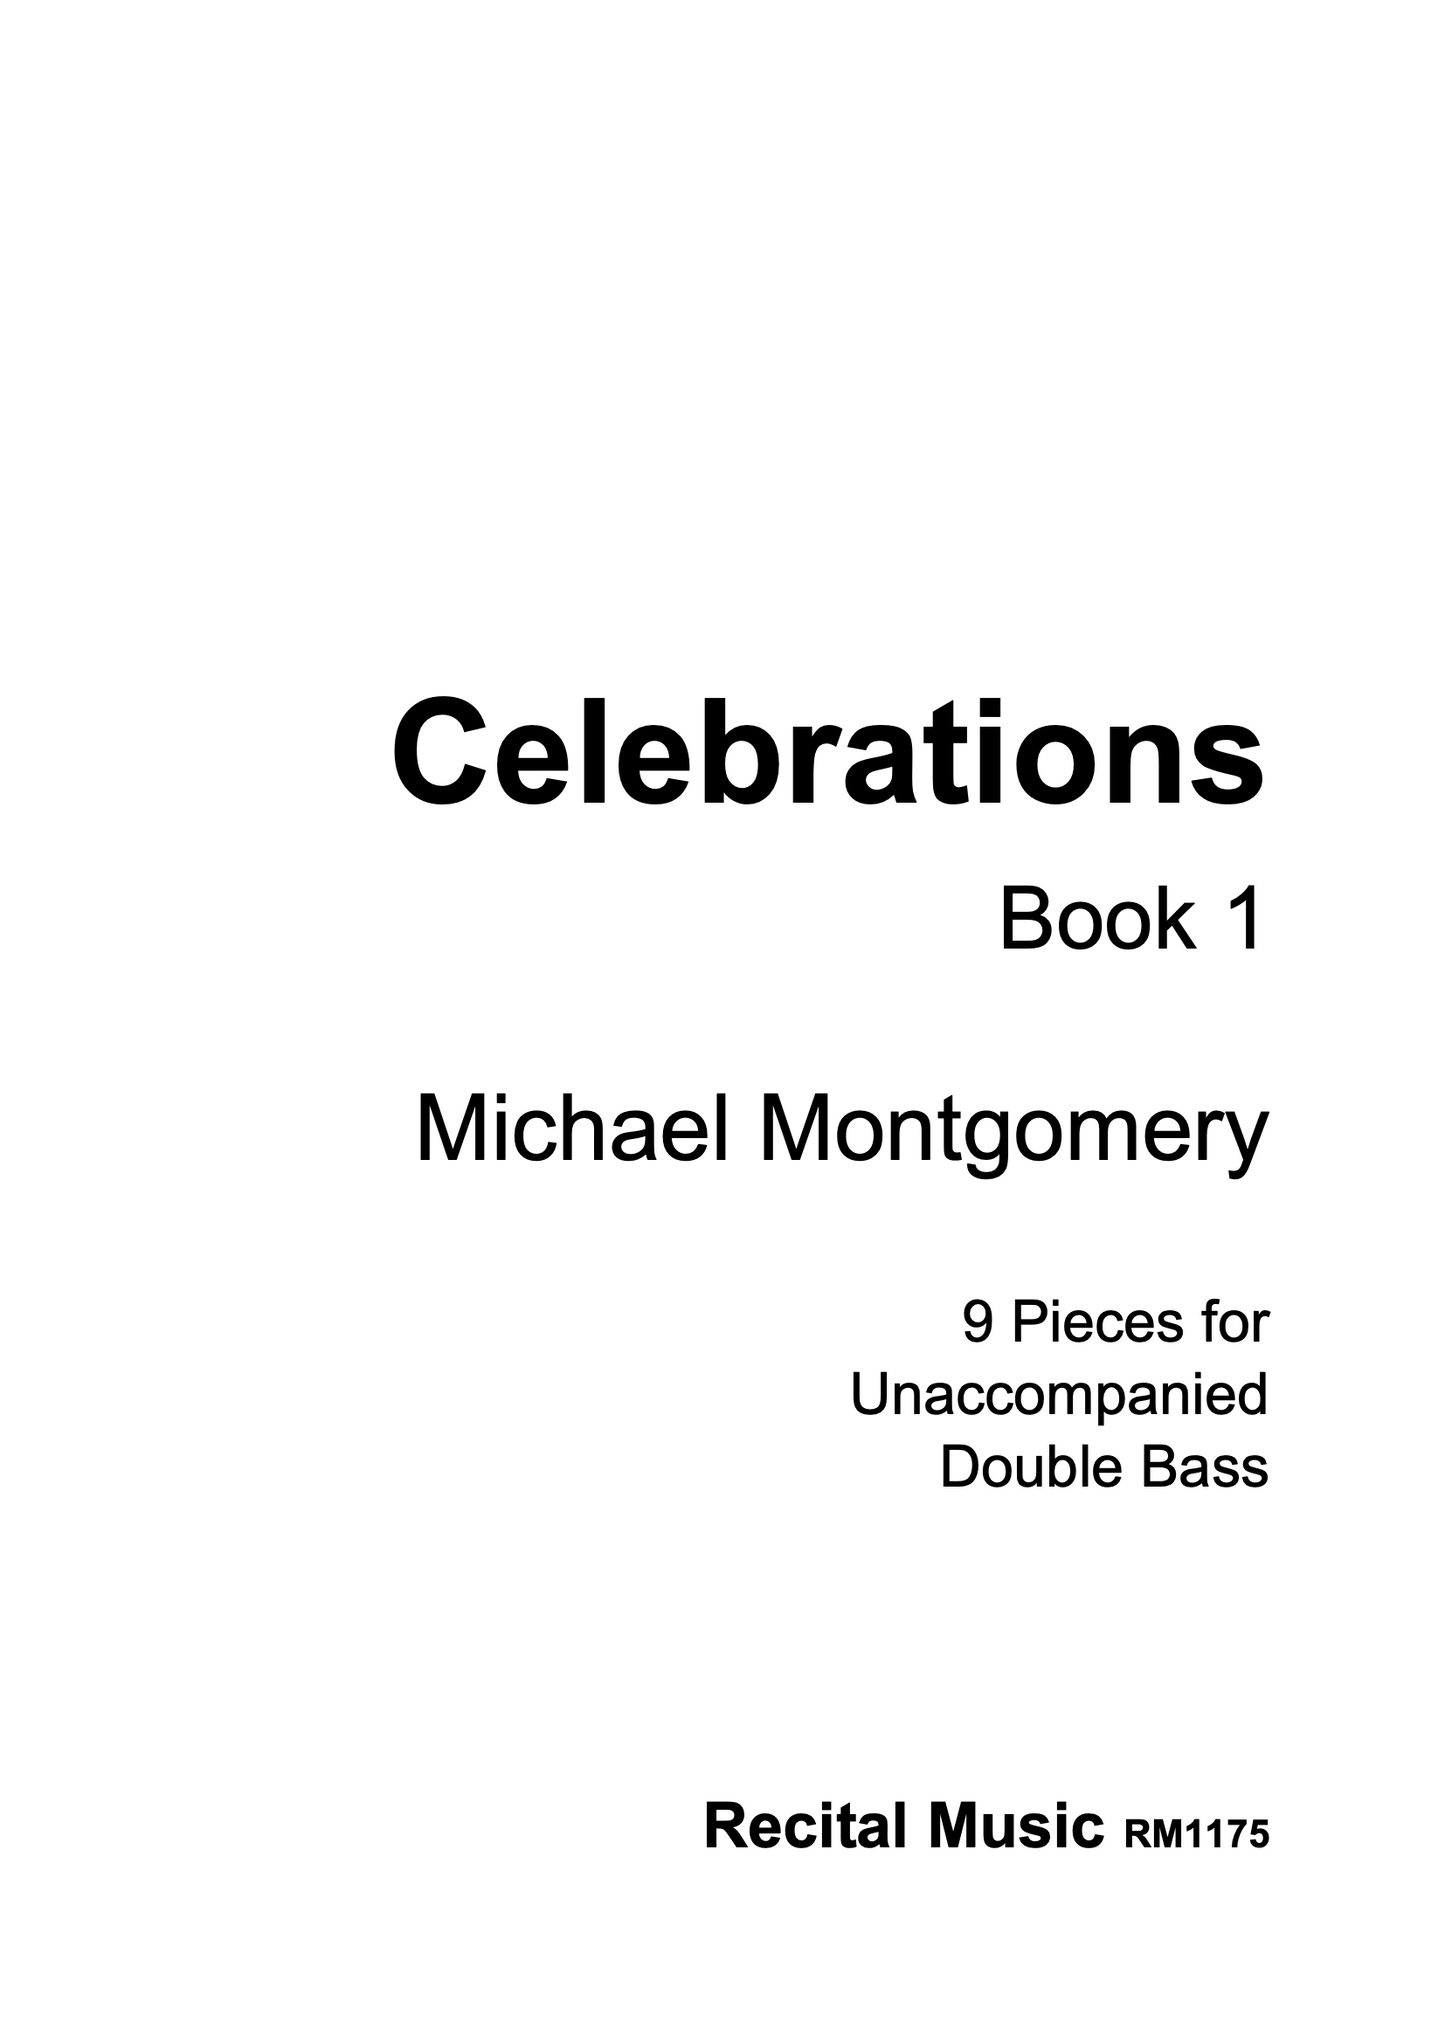 Michael Montgomery: Celebrations Book 1: 9 Pieces for unaccompanied double bass